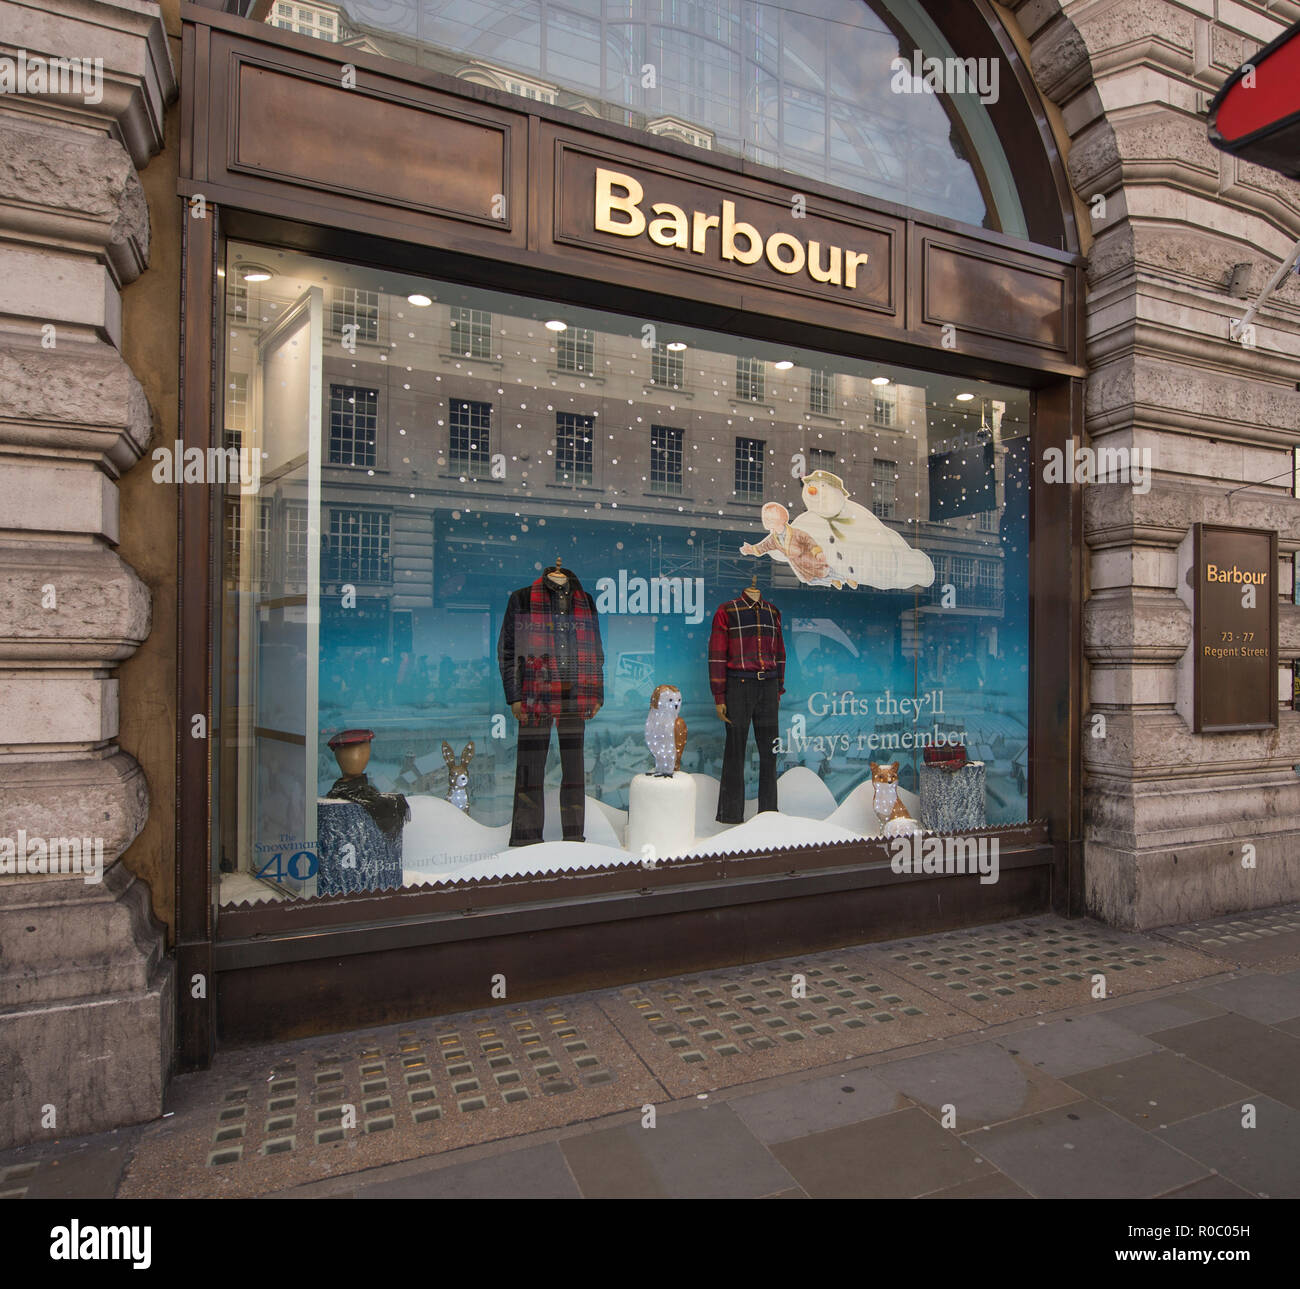 barbour piccadilly circus